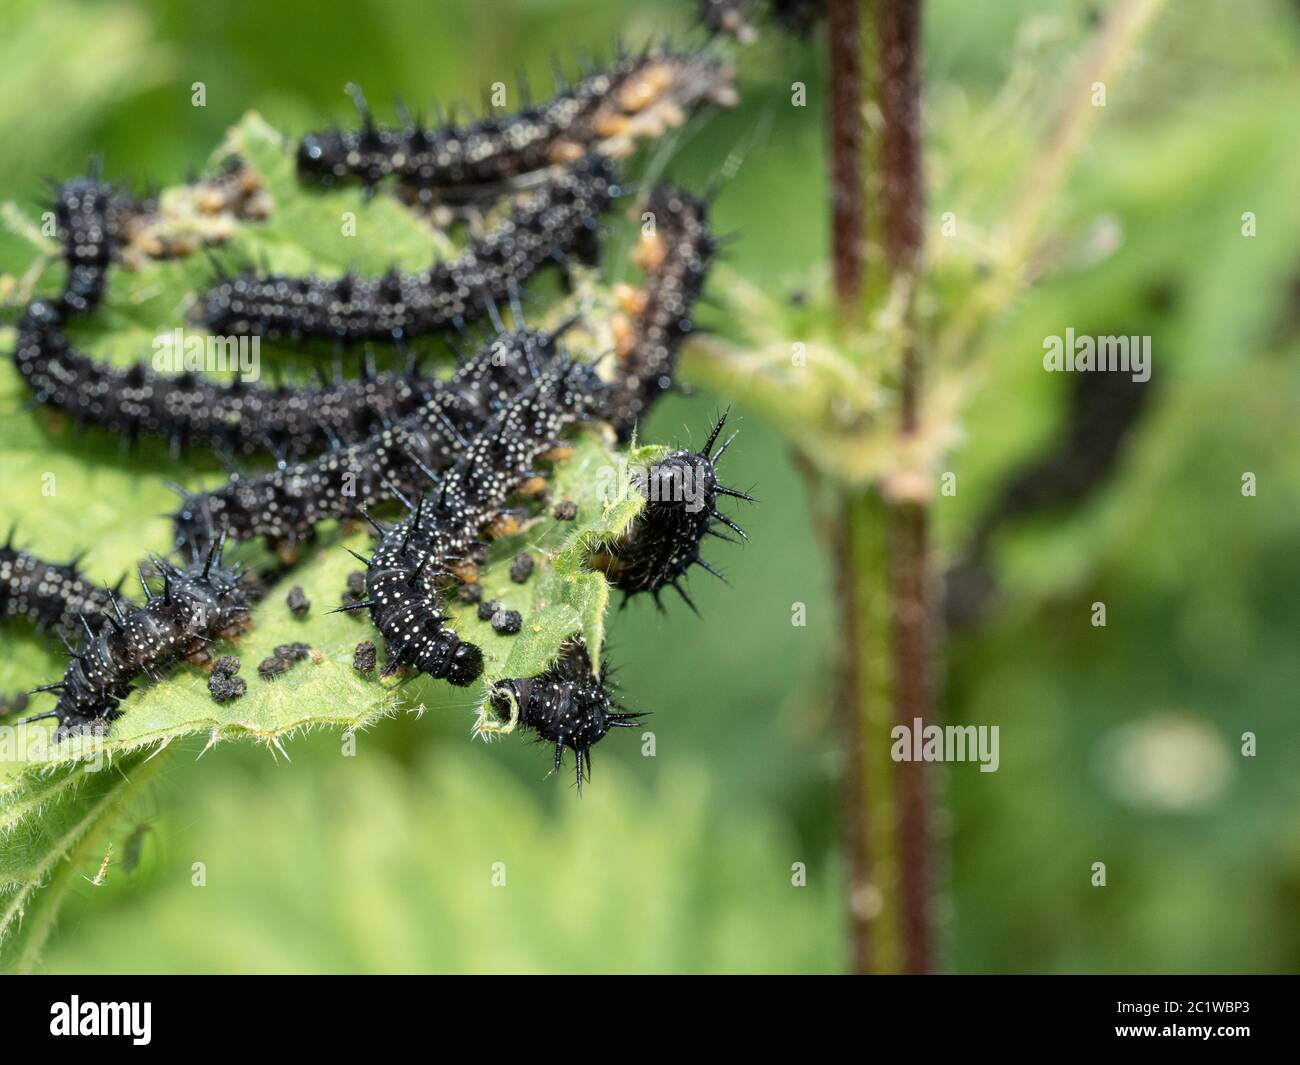 A close up of a group of young peacock butterfly caterpillars feeding on stinging nettle leaves Stock Photo